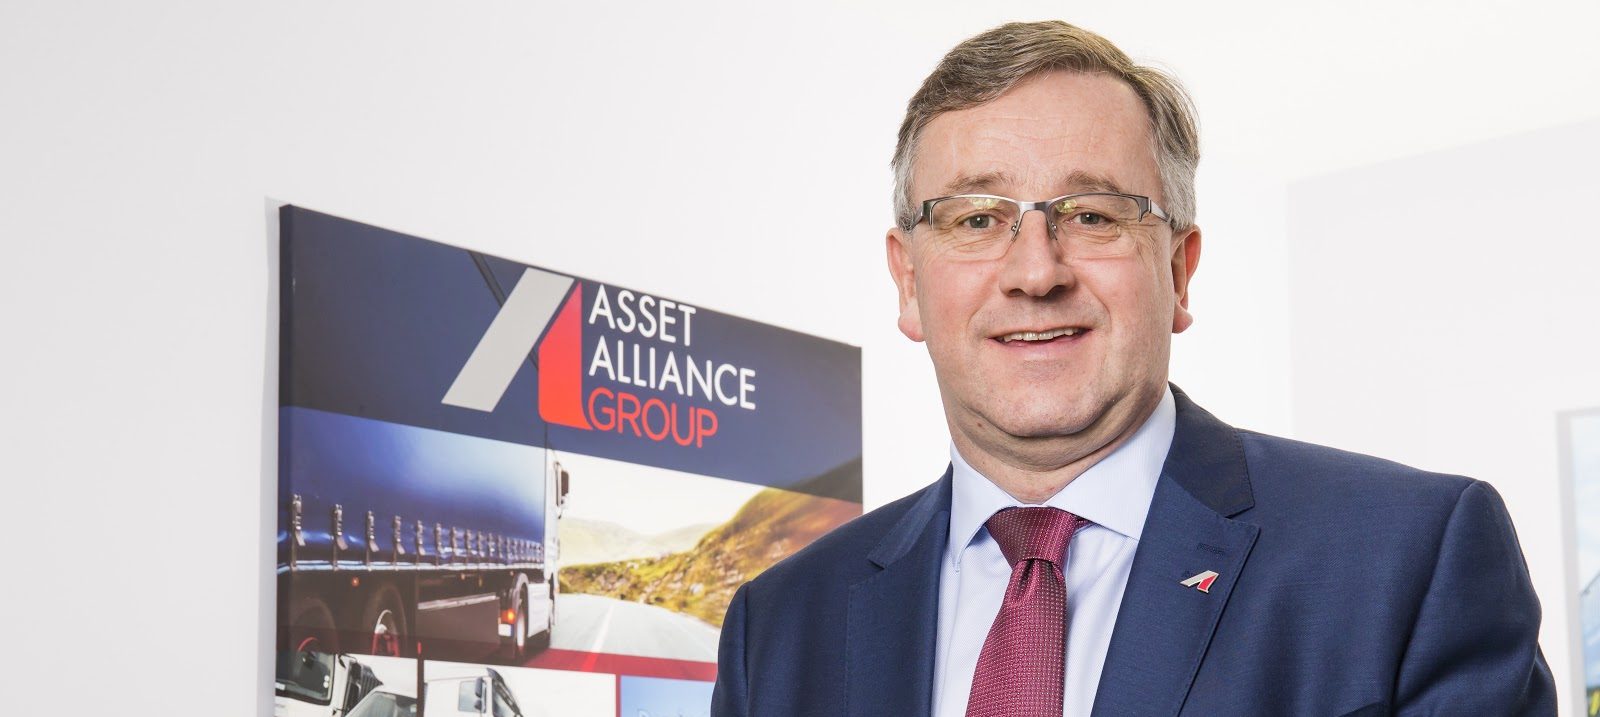 New Research from Asset Alliance Group Available at CVS